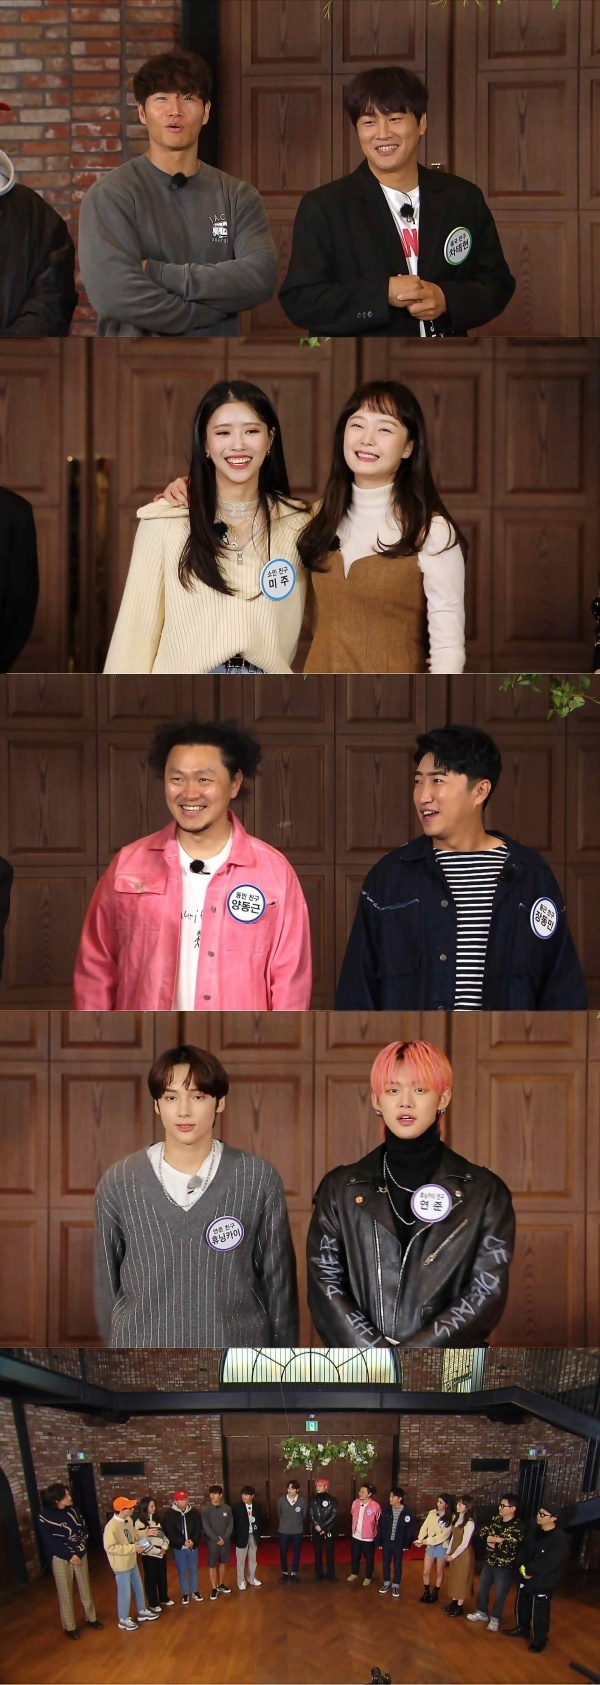 Running Man best friend shows off his imaginary friendship with Cha Tae-hyun, Kim Jong-kookCha Tae-hyun and Kim Jong-kooks friendship gives a laughSBS Running Man, which will be broadcast on December 6, is decorated with Best Features, and an unpredictable friendship race with the members actual best friends will be held.The 1st Friendship Awards ceremony was held at the recent Running Man recording, and Kim Jong-kooks rumored best friend Cha Tae-hyun, Jeon So-mins new best friend Lovelys Americas, Tom and Jerry Chemie Yang Dong-geun, Jang Dong-min and Tomorrow By Togethers Fed and Humanning Kai were invited as guests.As the best friends who know each other in a way, the opening was followed by unrelenting privacy revelations and ruthless snipers.In particular, Kim Jong-kook said, I talked to Cha Tae-hyun for 30 minutes... Cha Tae-hyun released his personal conversation and laughed at the Marriage know-how.minjee Lee